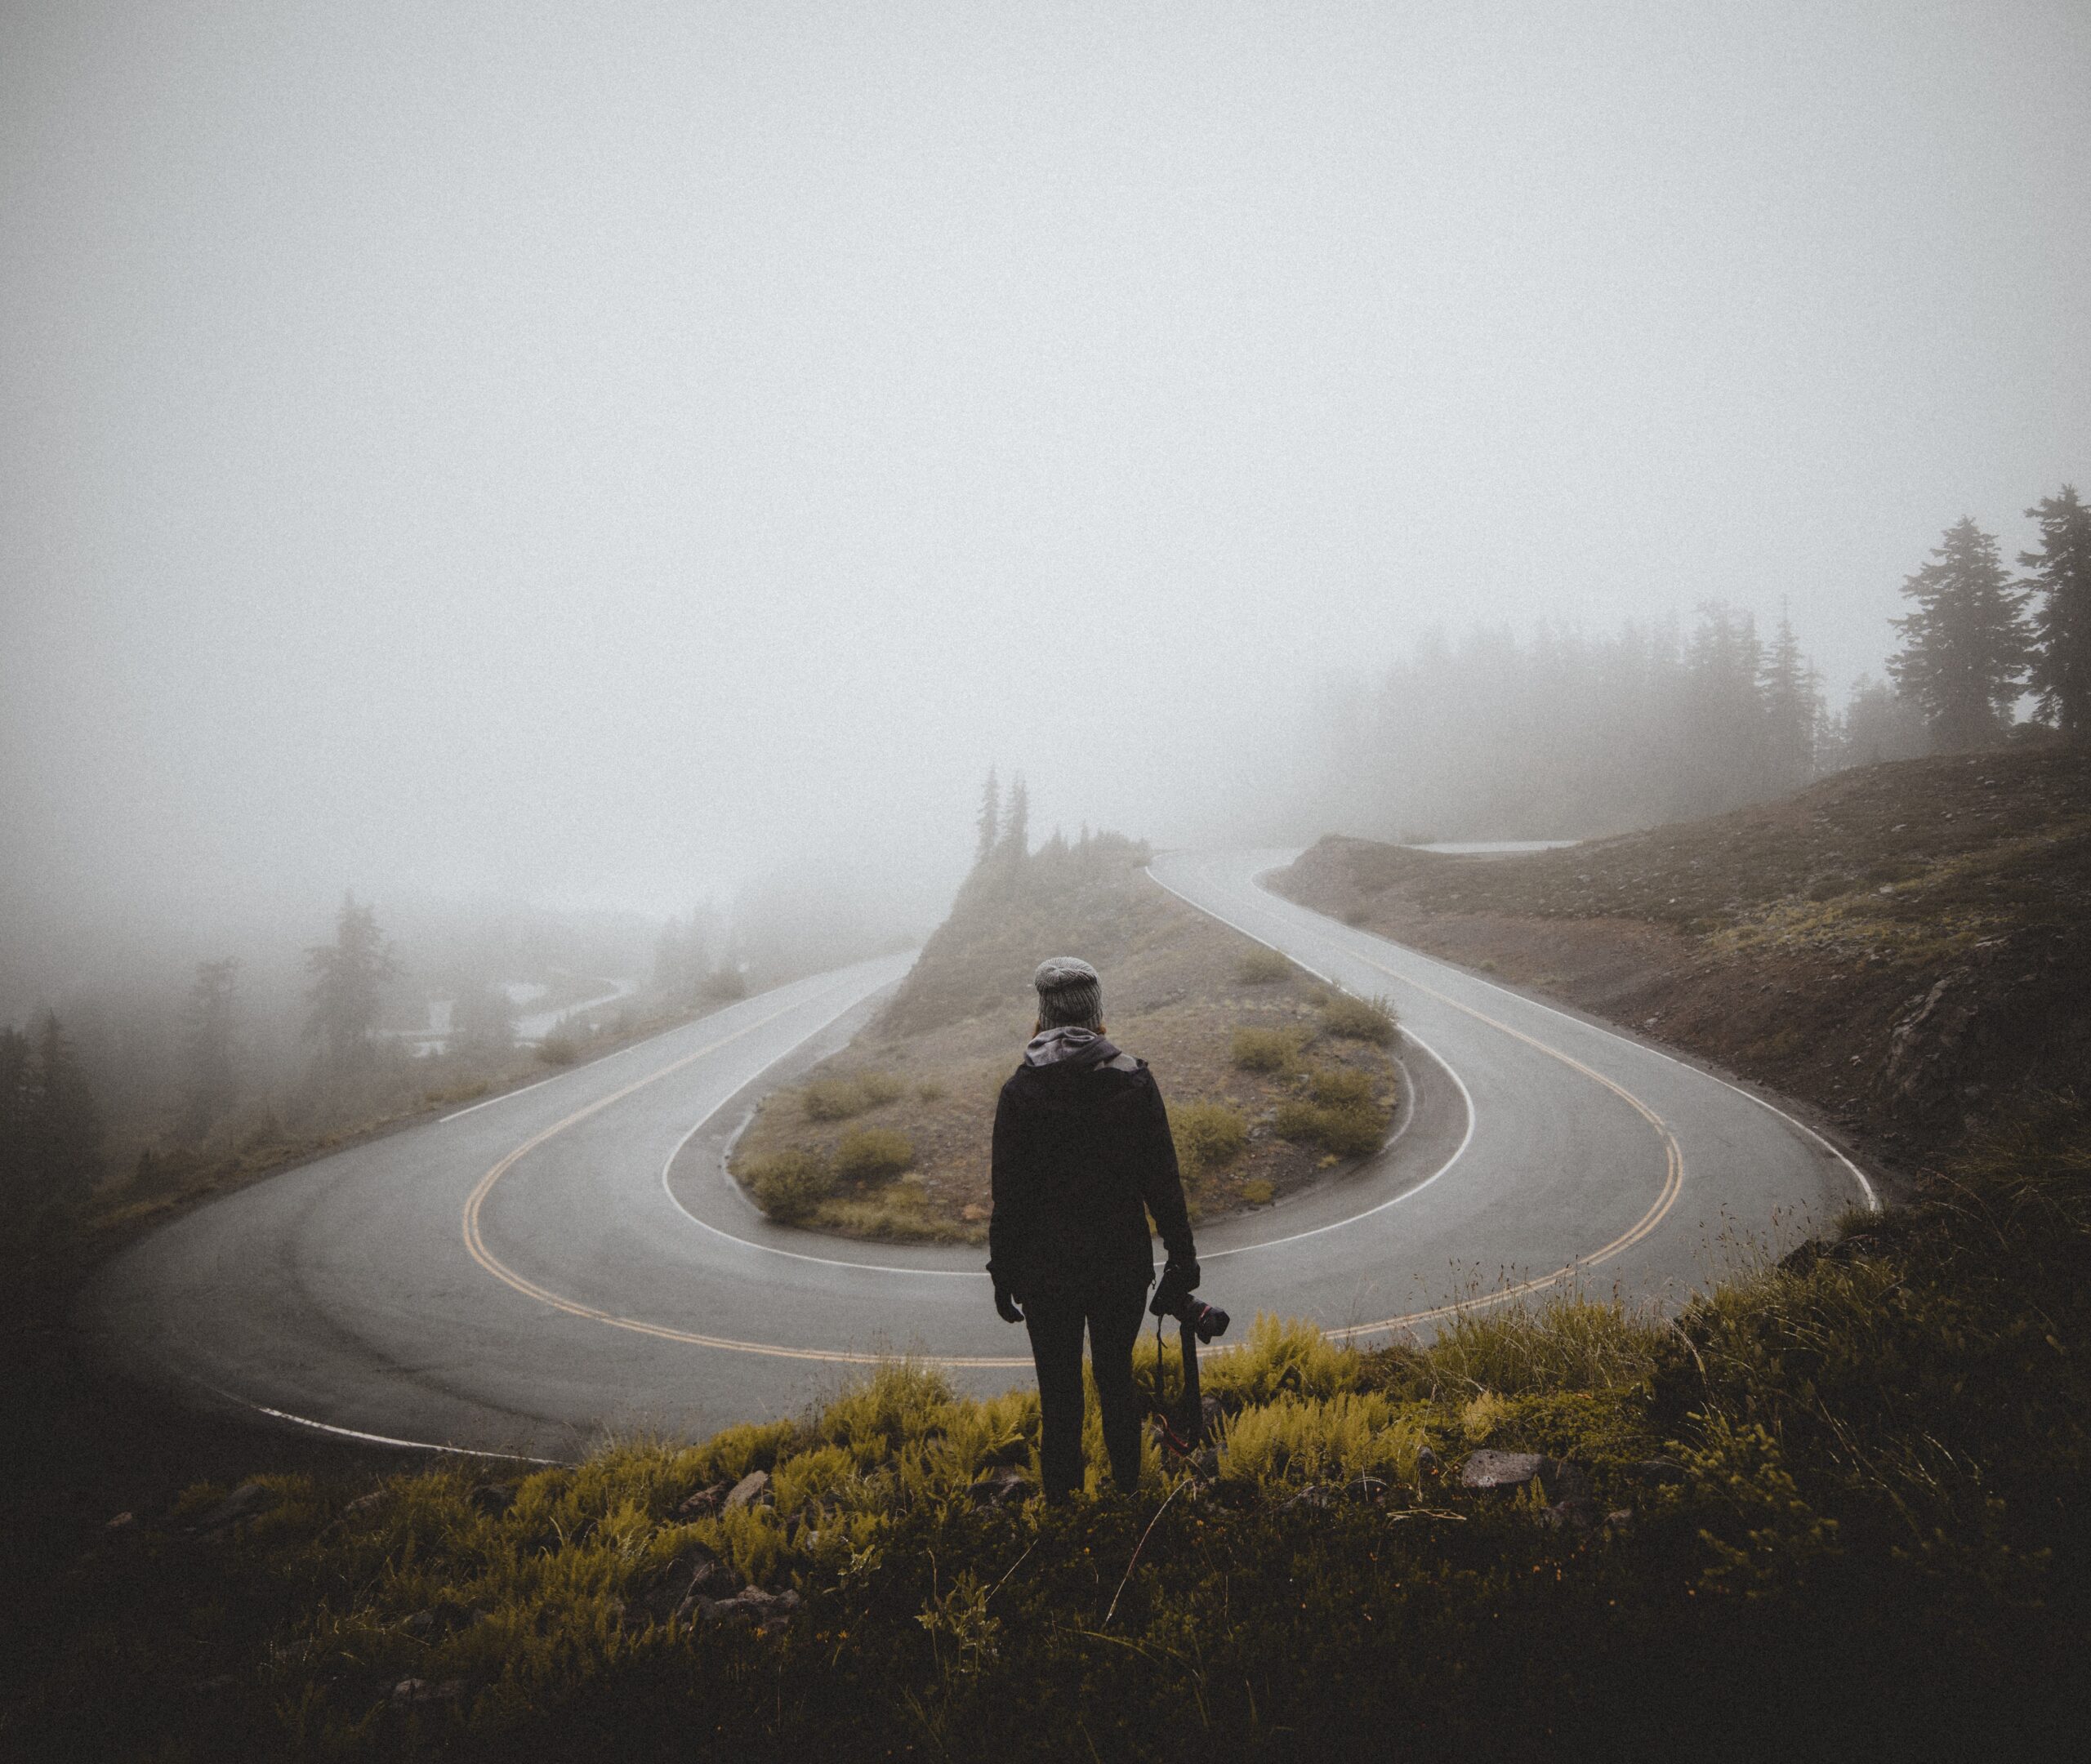 Photo Of U-bend In Road And Man Looking At It To Signify A Turning Point